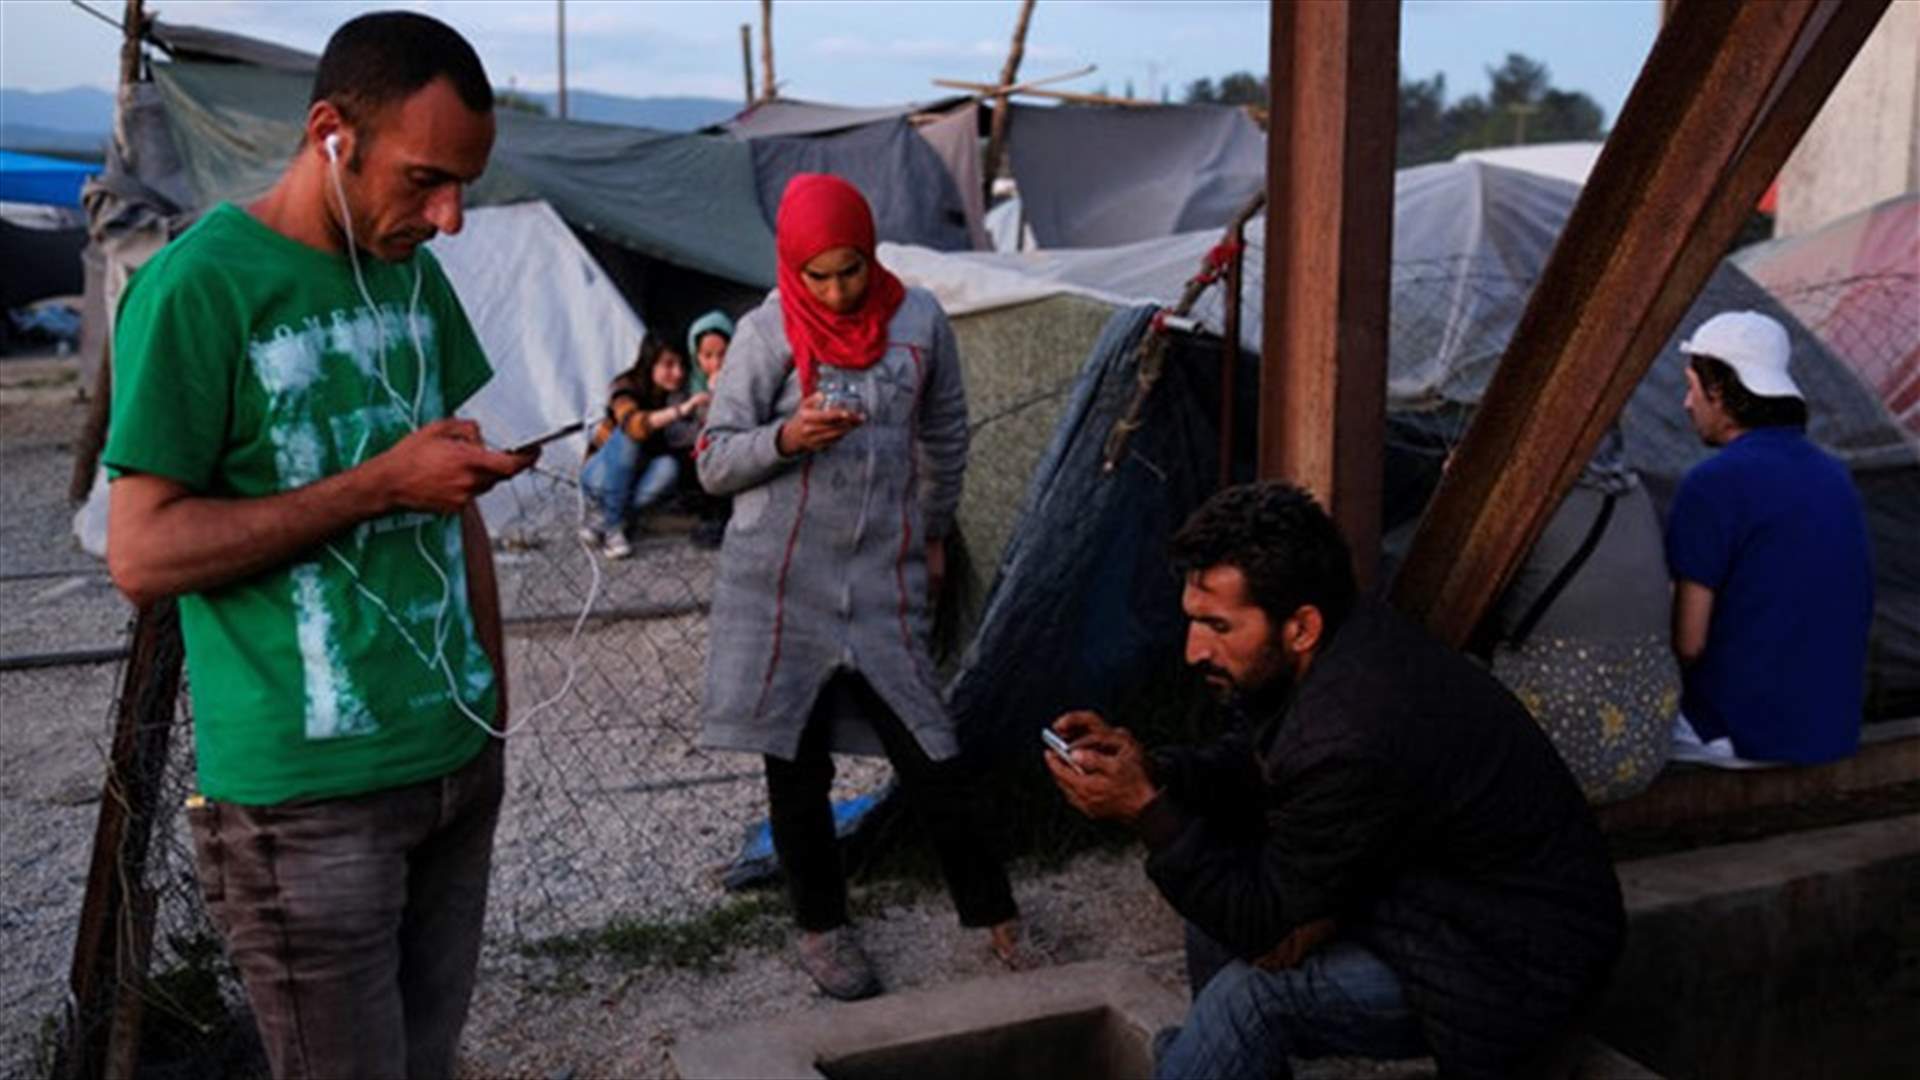 Facebook Group Raises $100,000 To Help Refugees Stay Connected